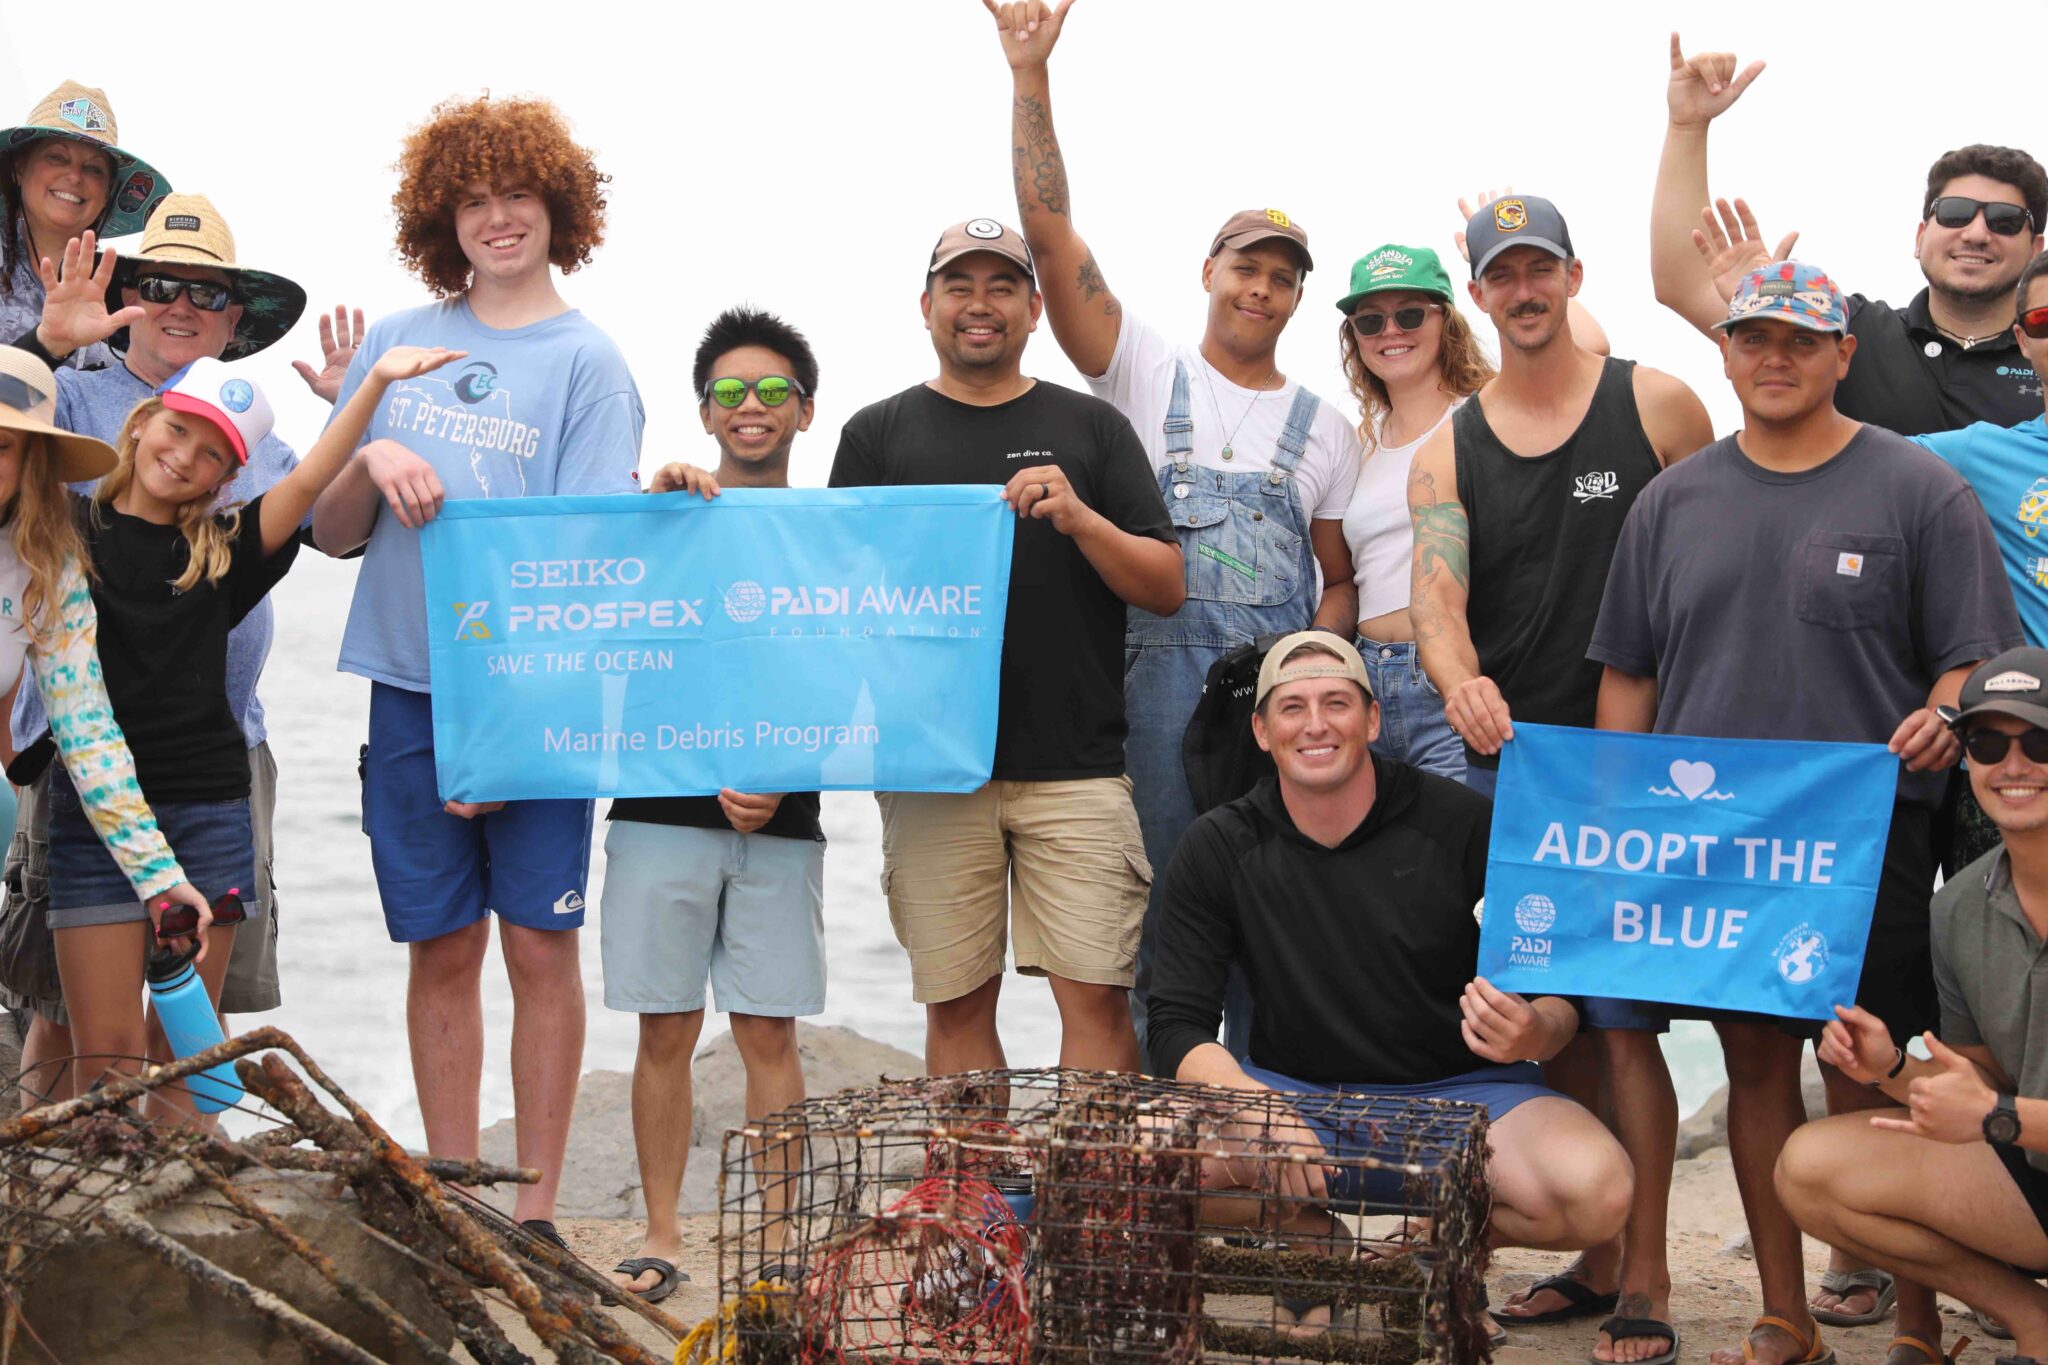 PADI AWARE Supporters celebrating a successful ocean clean up. 